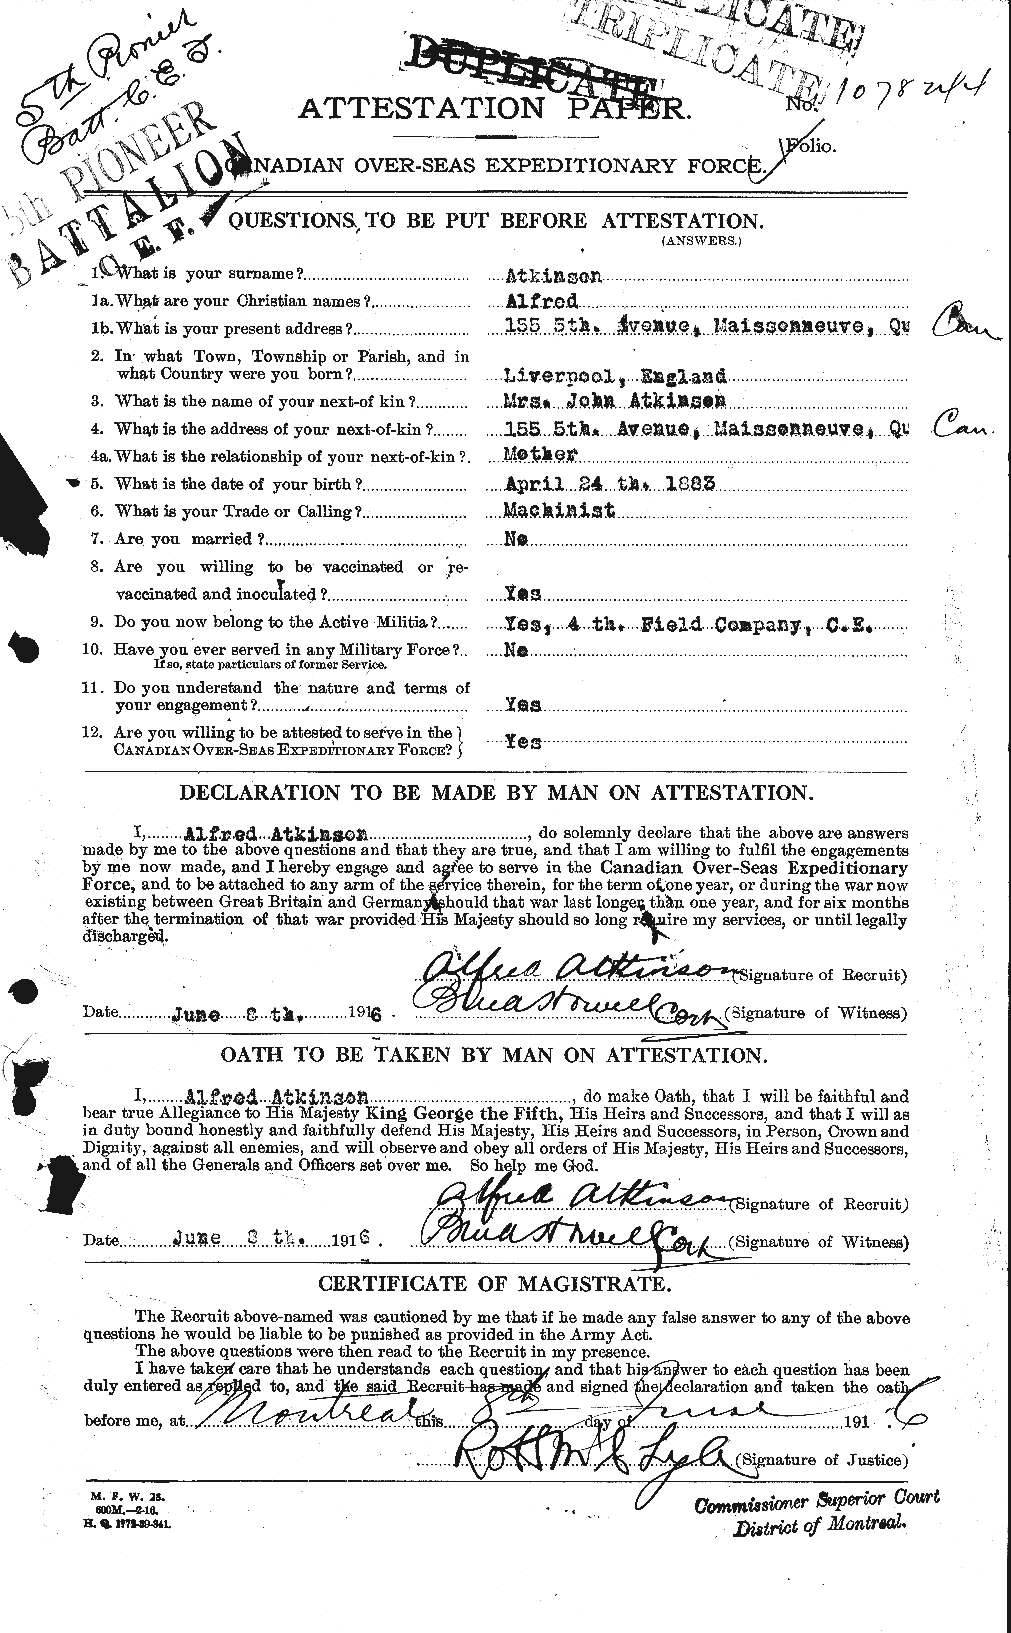 Personnel Records of the First World War - CEF 217580a